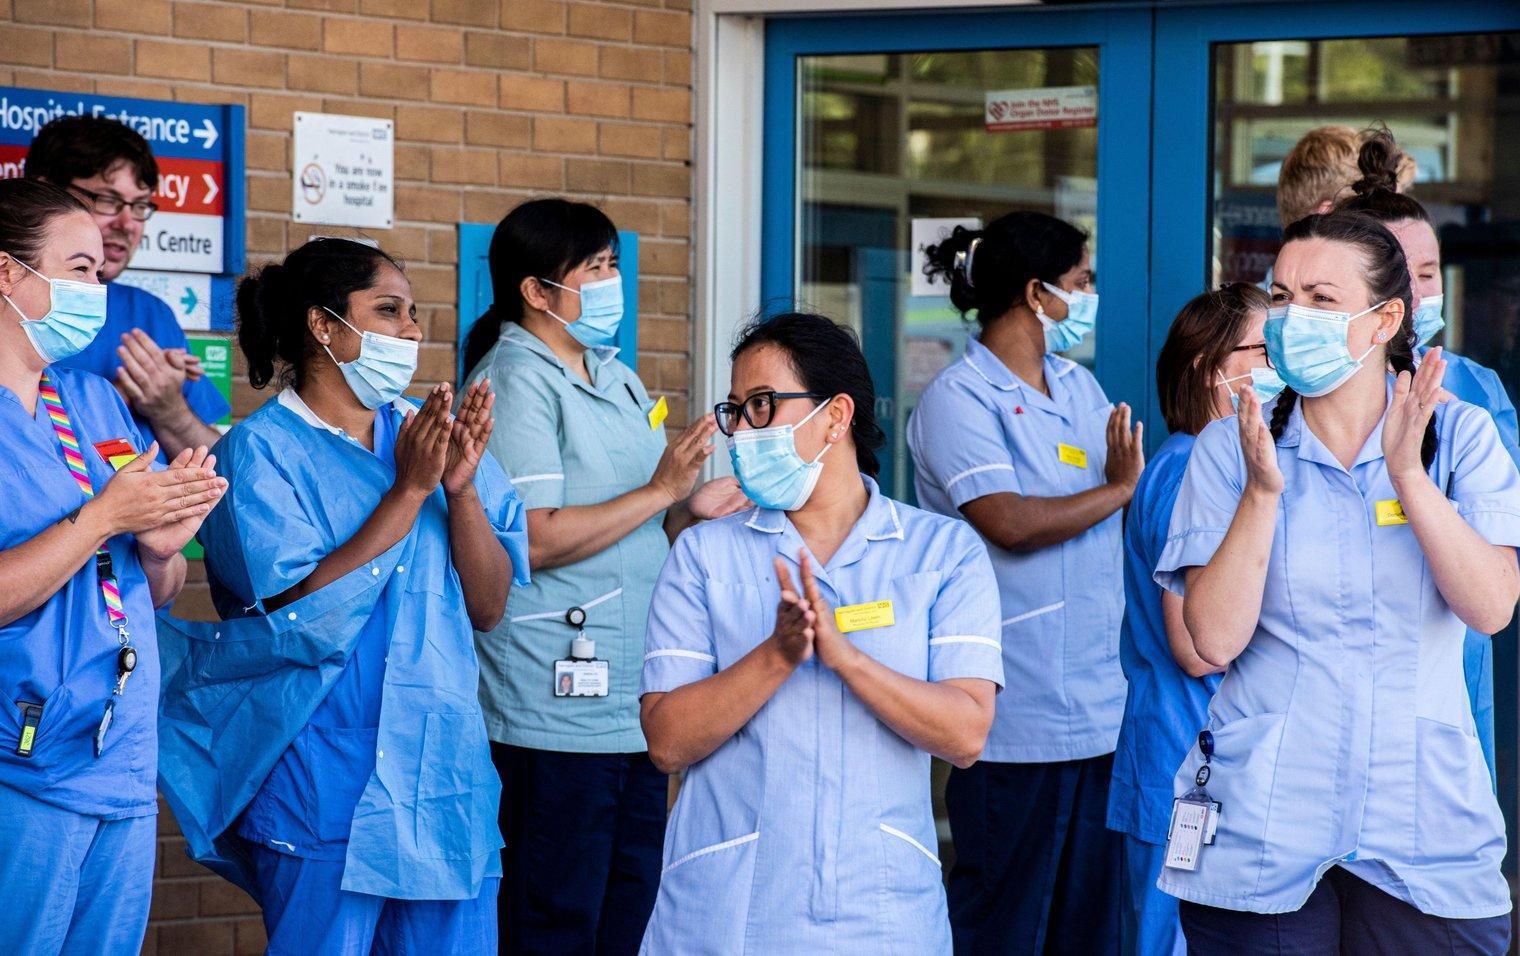 A 2020 Royal College of Nursing study found nurses are underpaid because they are mostly women. (Photo: Ernesto rogata / Alamy Stock Photo)